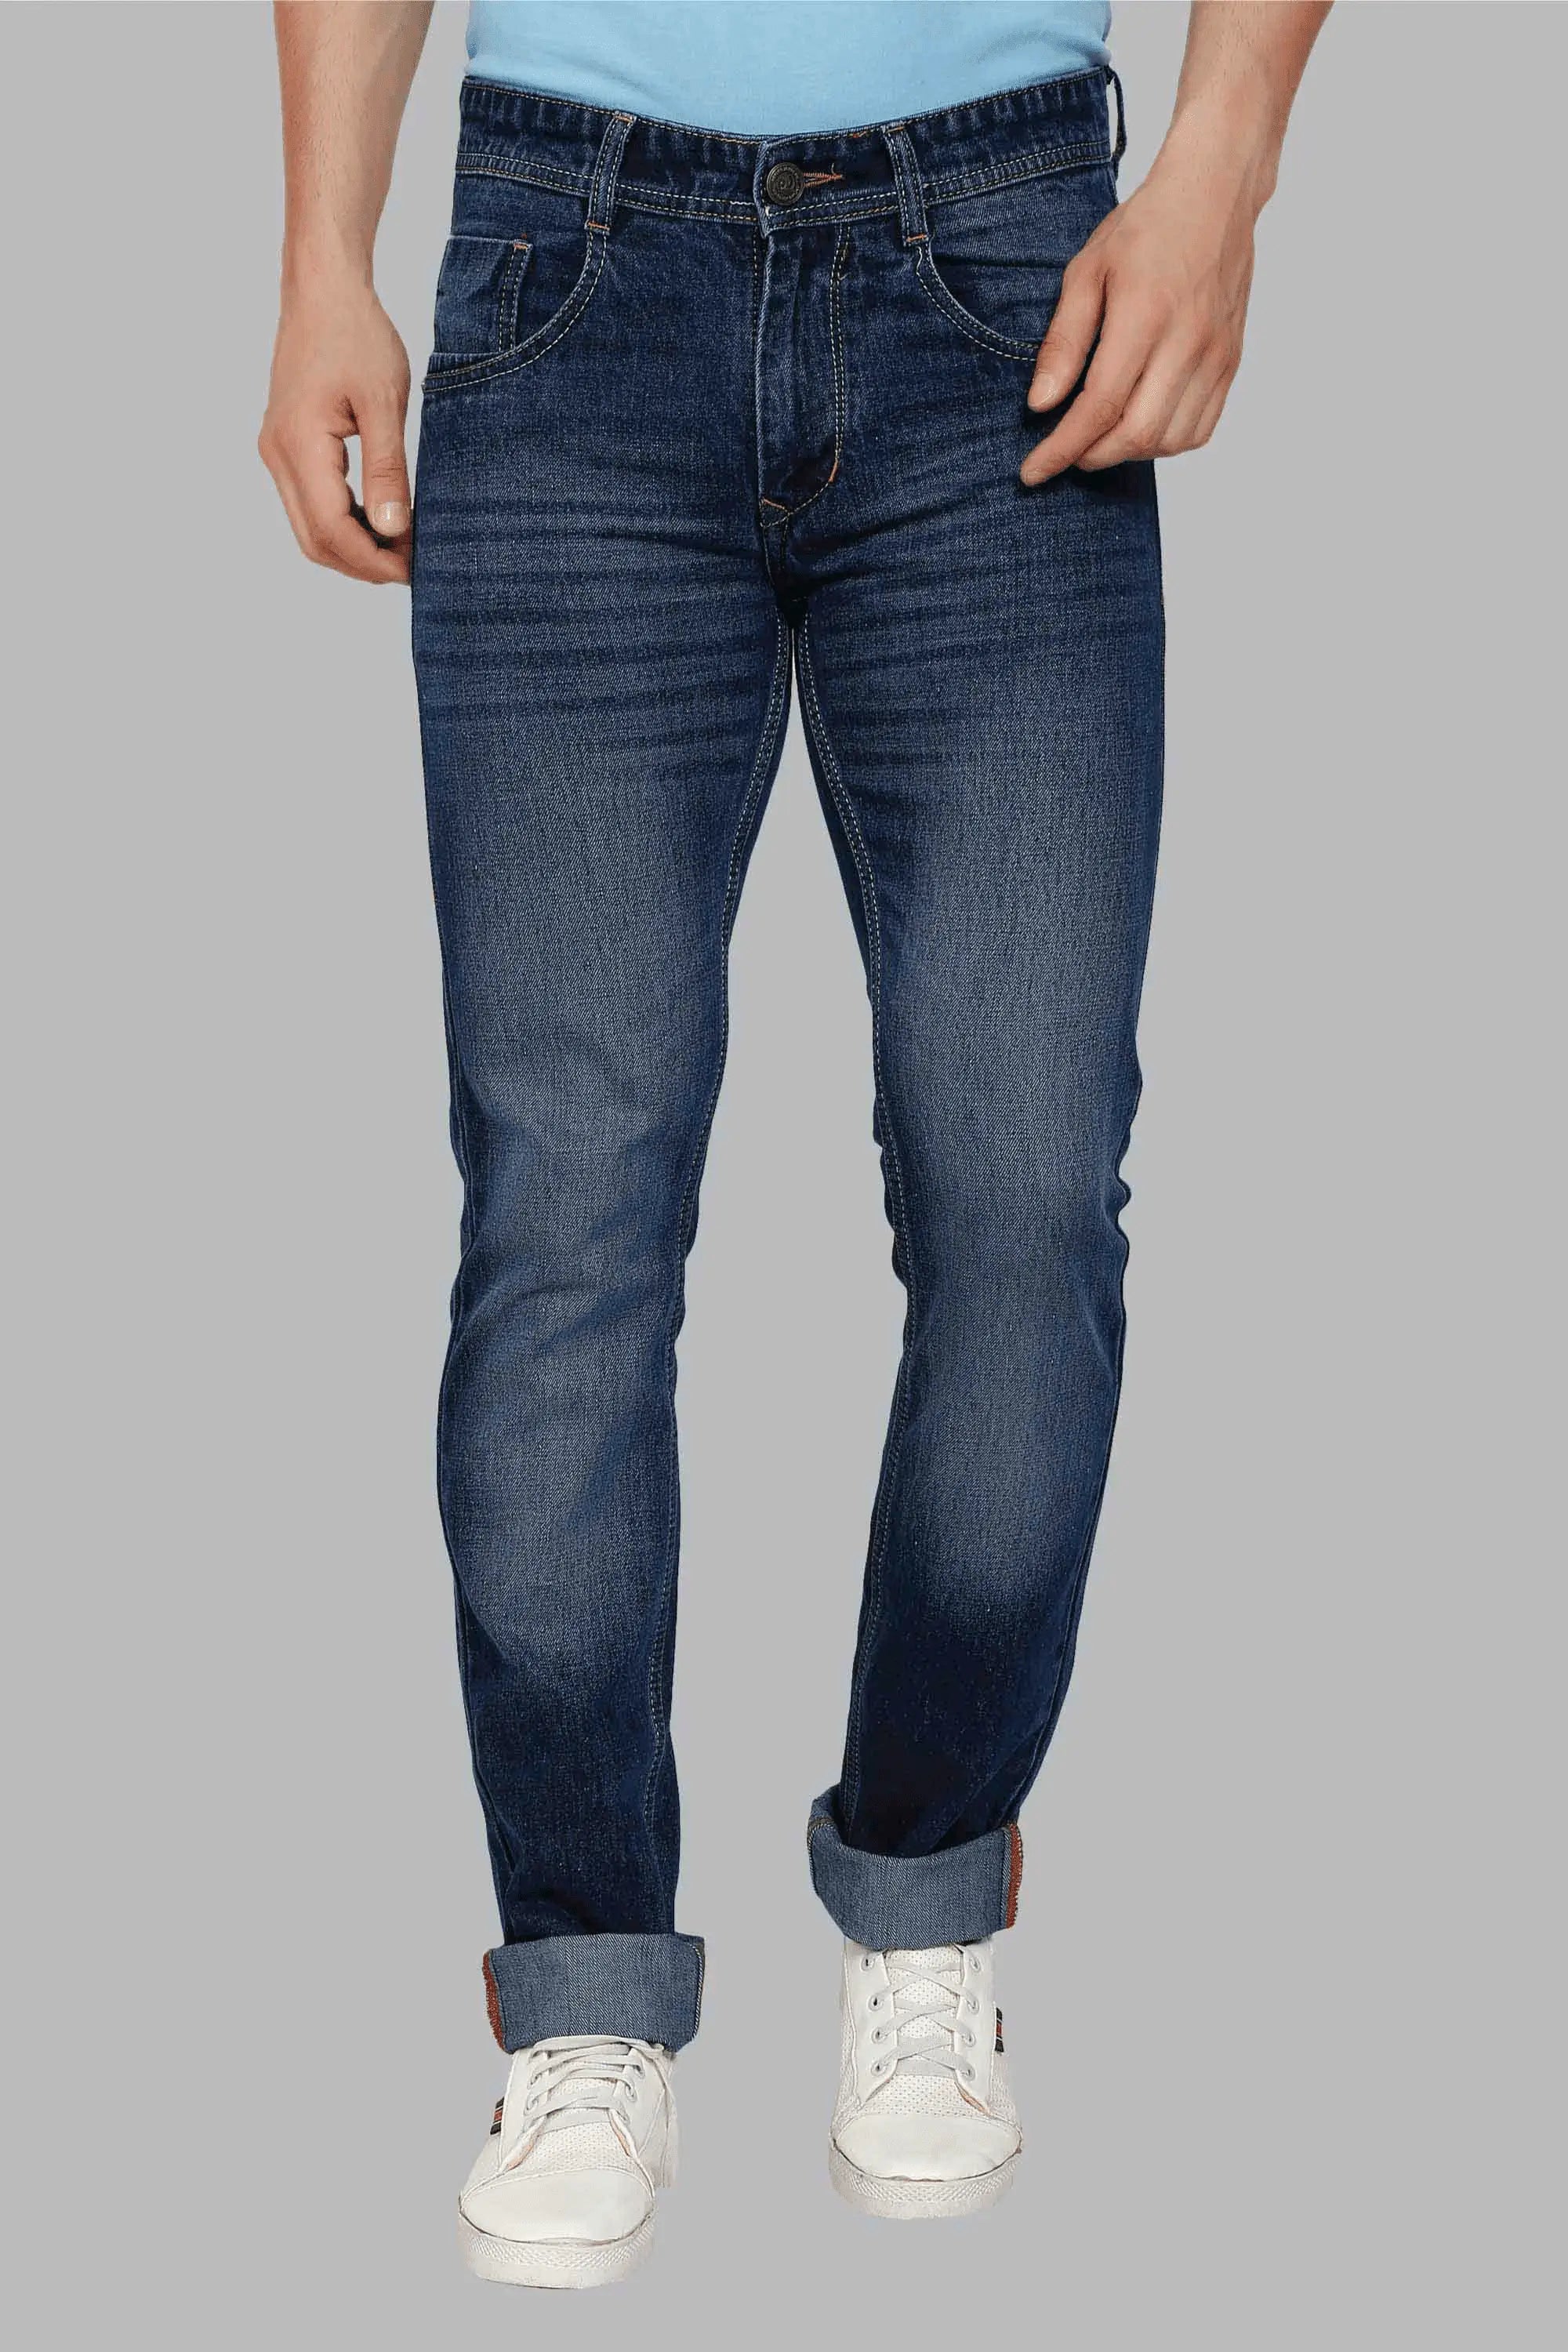 Slim Fit Blue with Shade Denim Jeans For Men